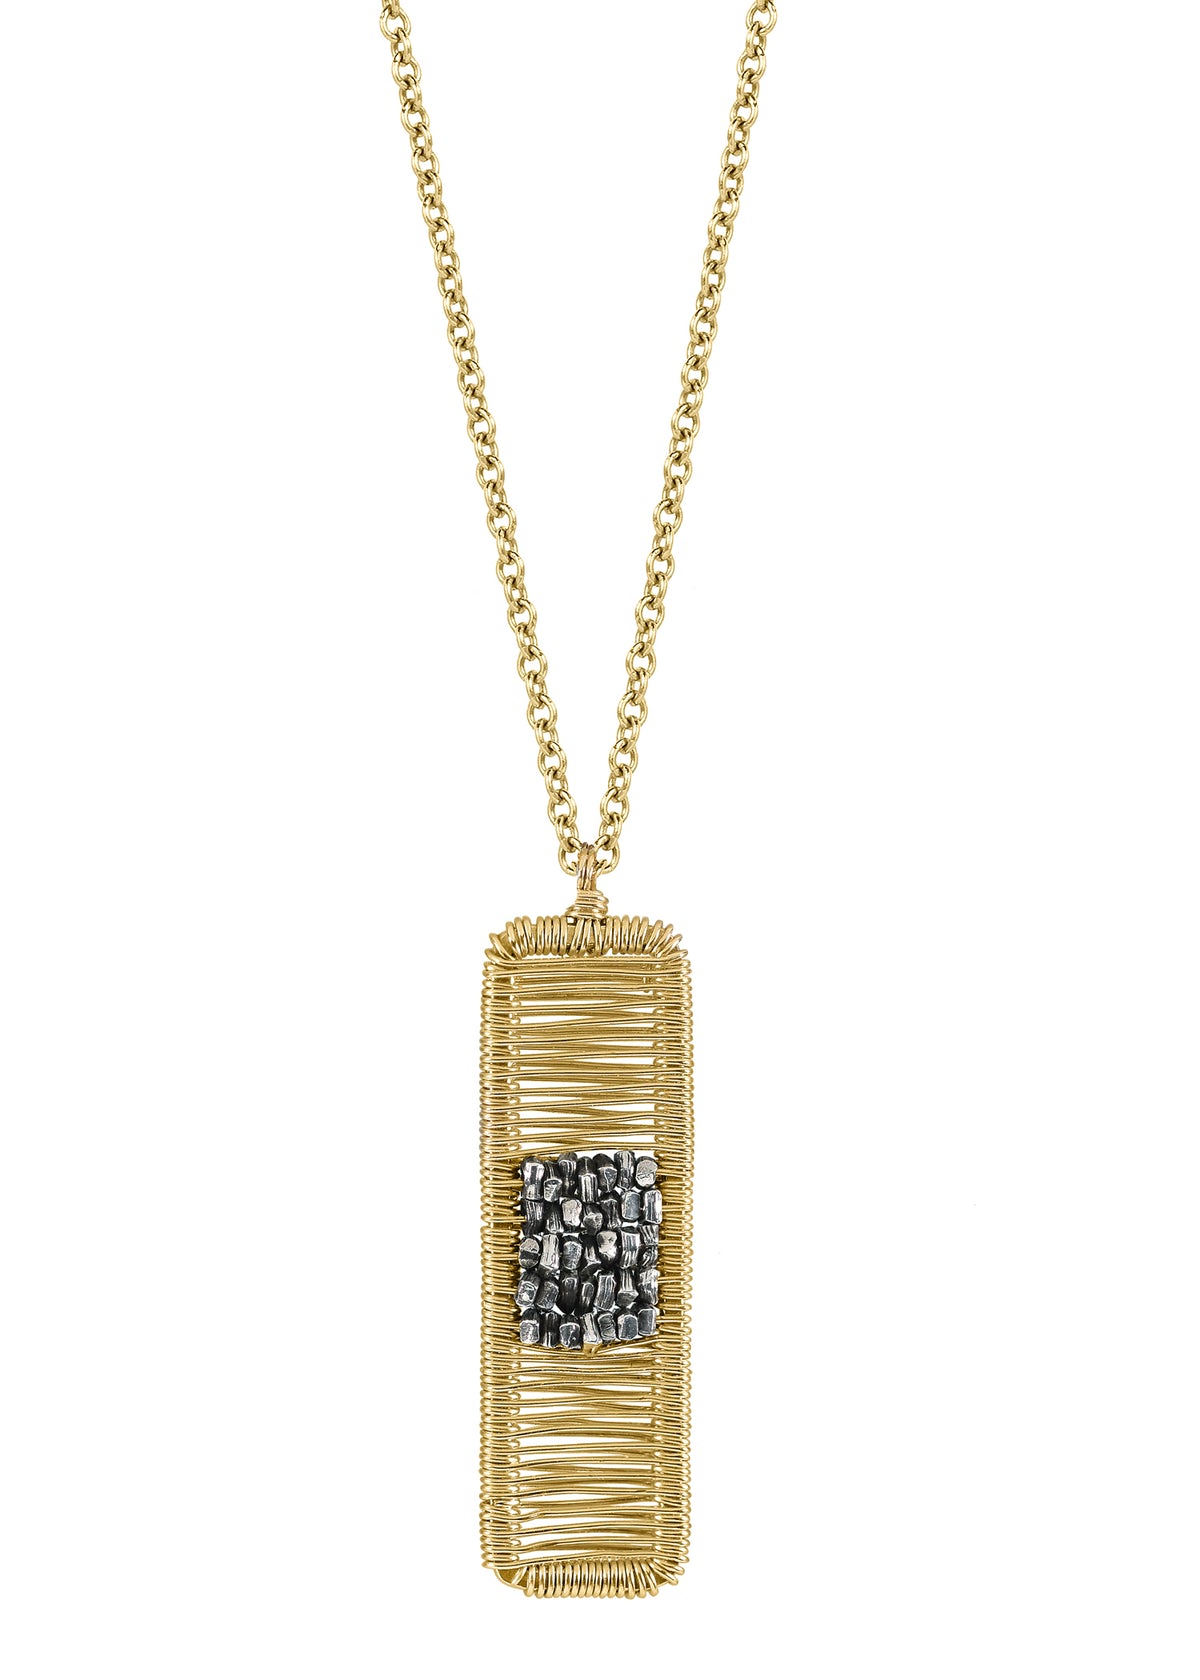 14k gold fill Sterling silver Mixed metal Necklace measures 17&quot; in length Pendant measures 1&quot; in length and 5/16&quot; in width Handmade in our Los Angeles studio